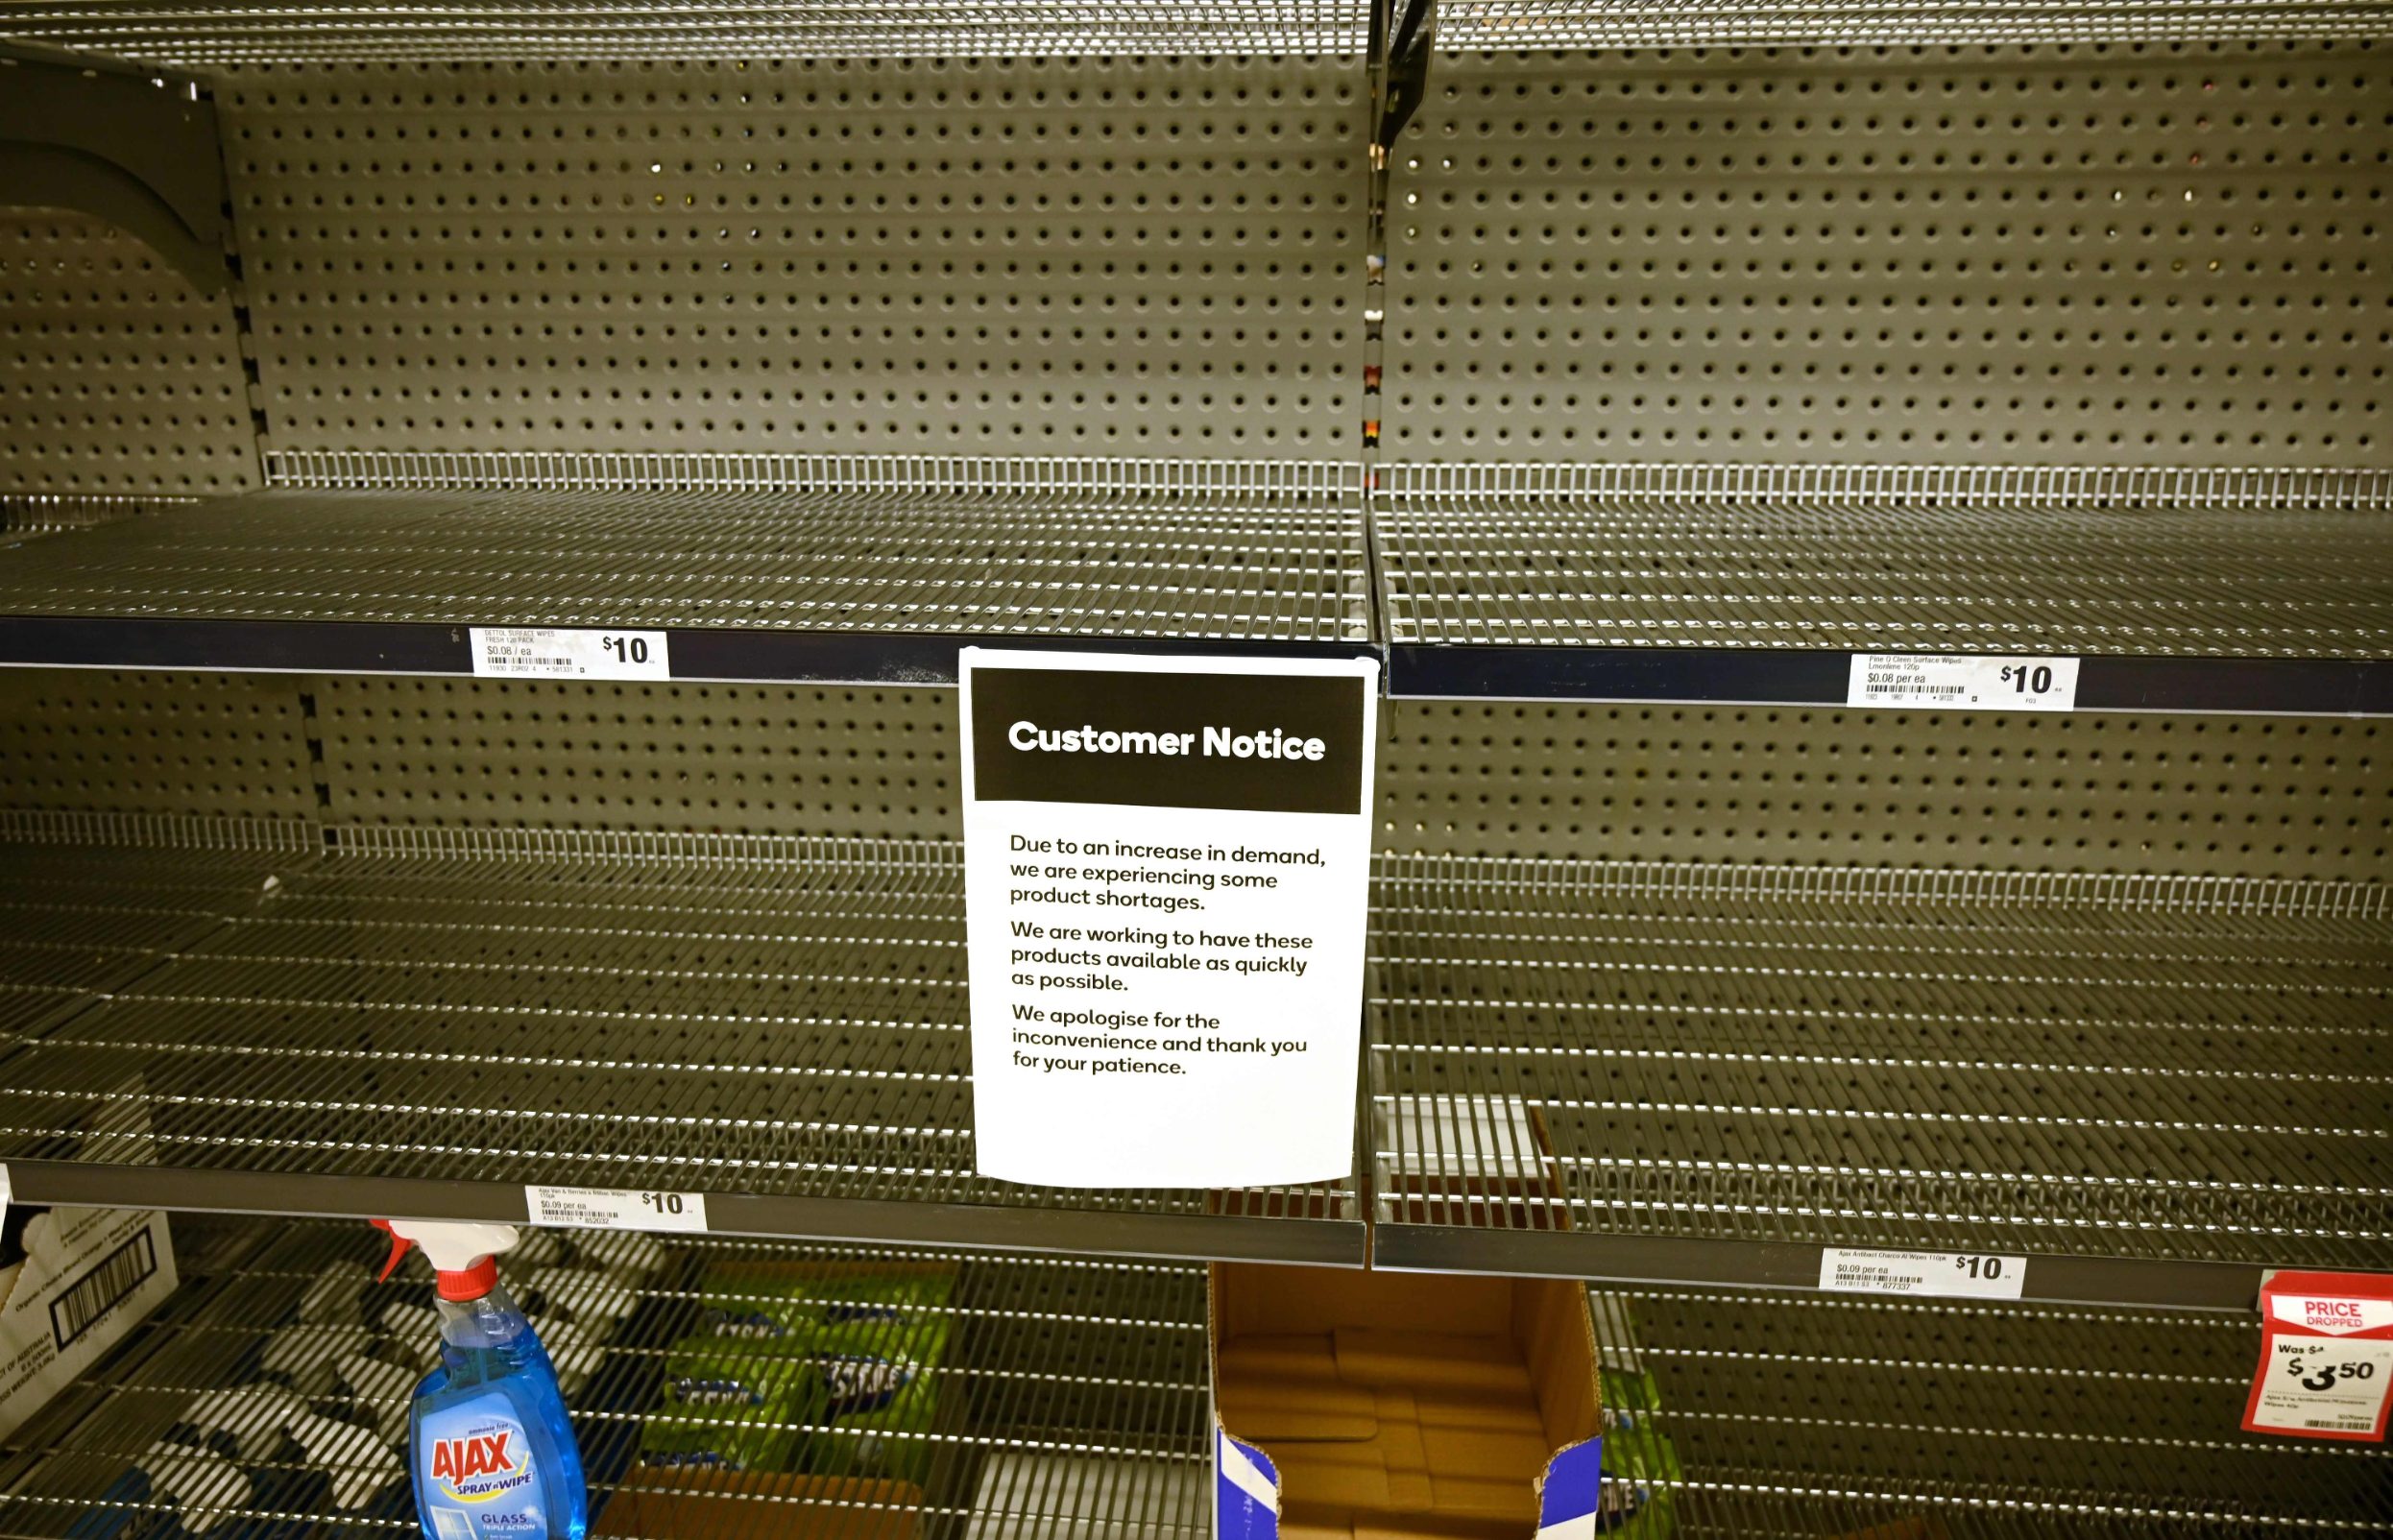 Shelves are empty of hand sanitiser in a supermarket in Sydney on March 4, 2020. - Australia's biggest supermarket announced a limit on hand sanitisers and toilet paper purchases after the global spread of coronavirus sparked a spate of panic buying Down Under. (Photo by PETER PARKS / AFP)